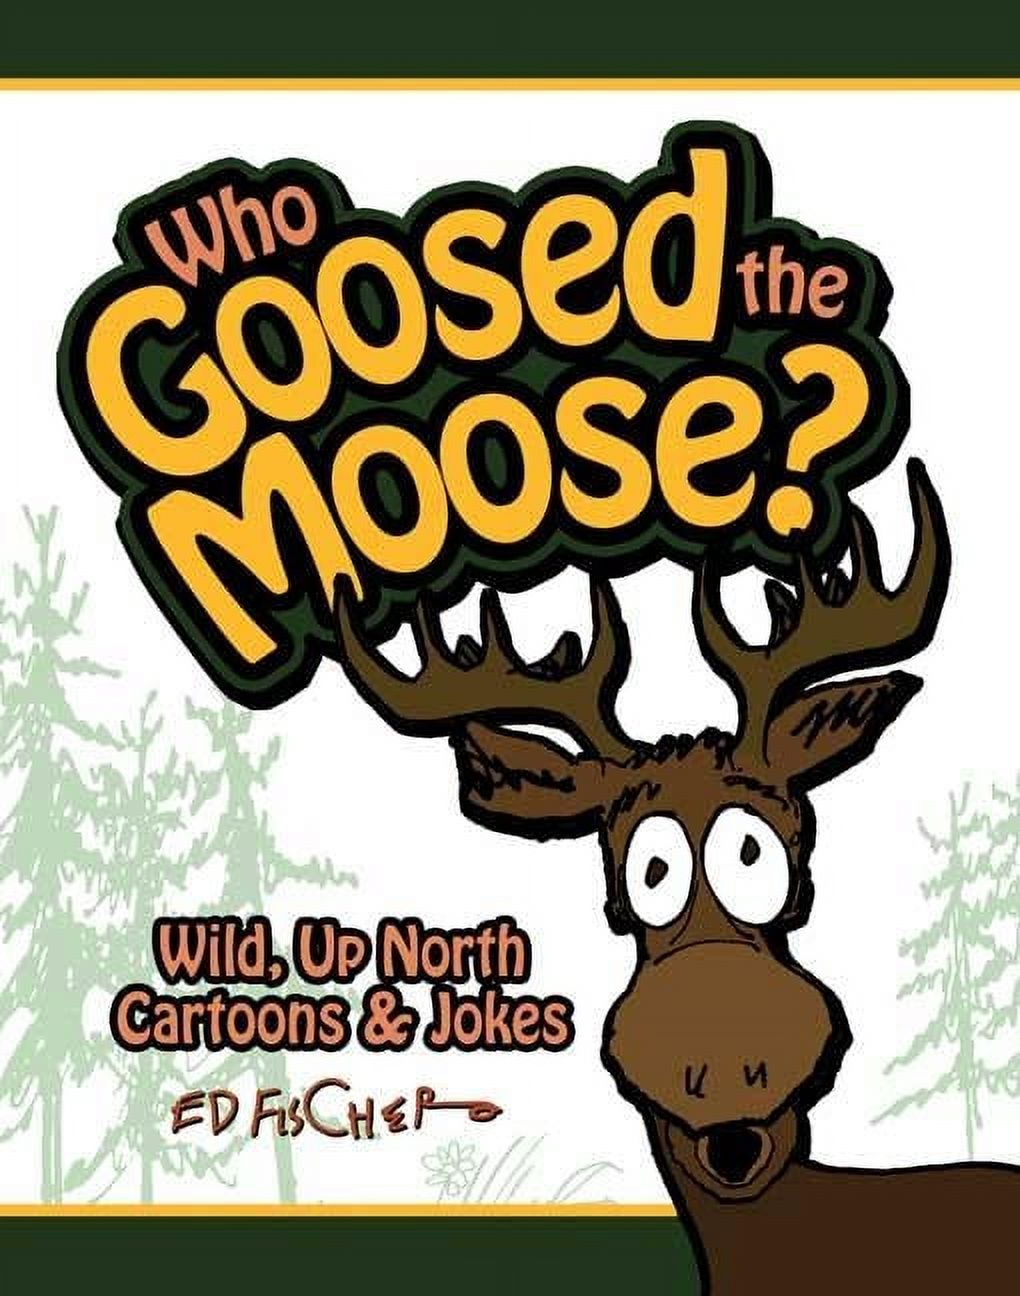 Who Goosed the Moose?: Wild, Up North Cartoons & Jokes (Paperback) - image 1 of 1